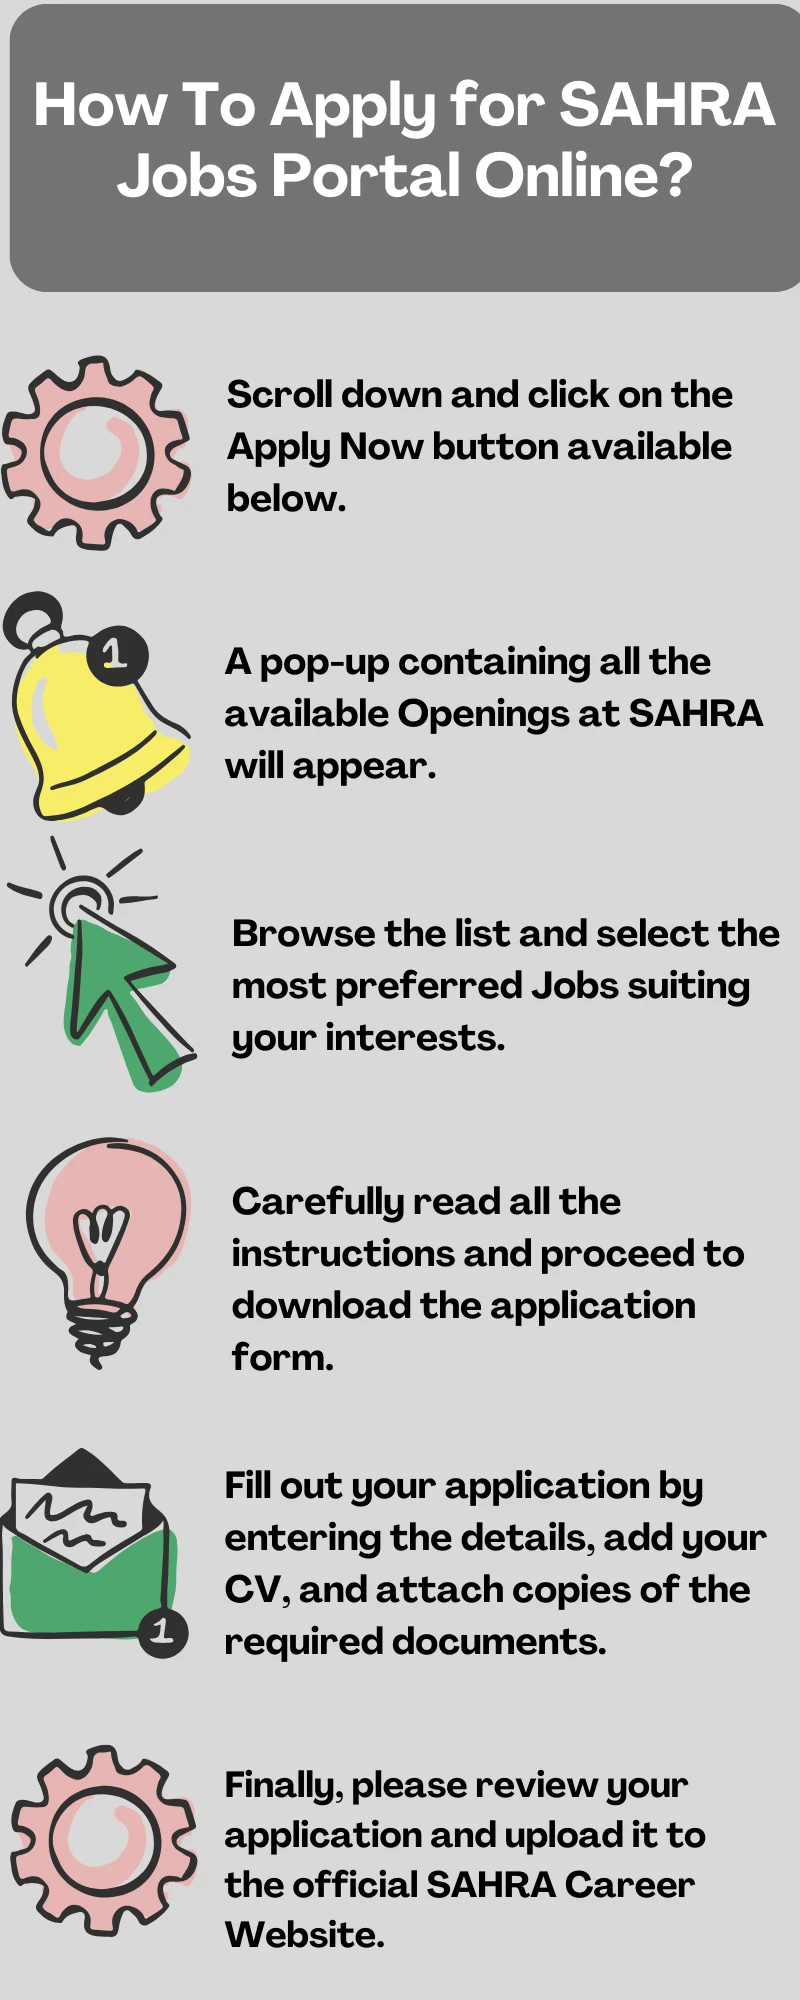 How To Apply for SAHRA Jobs Portal Online?